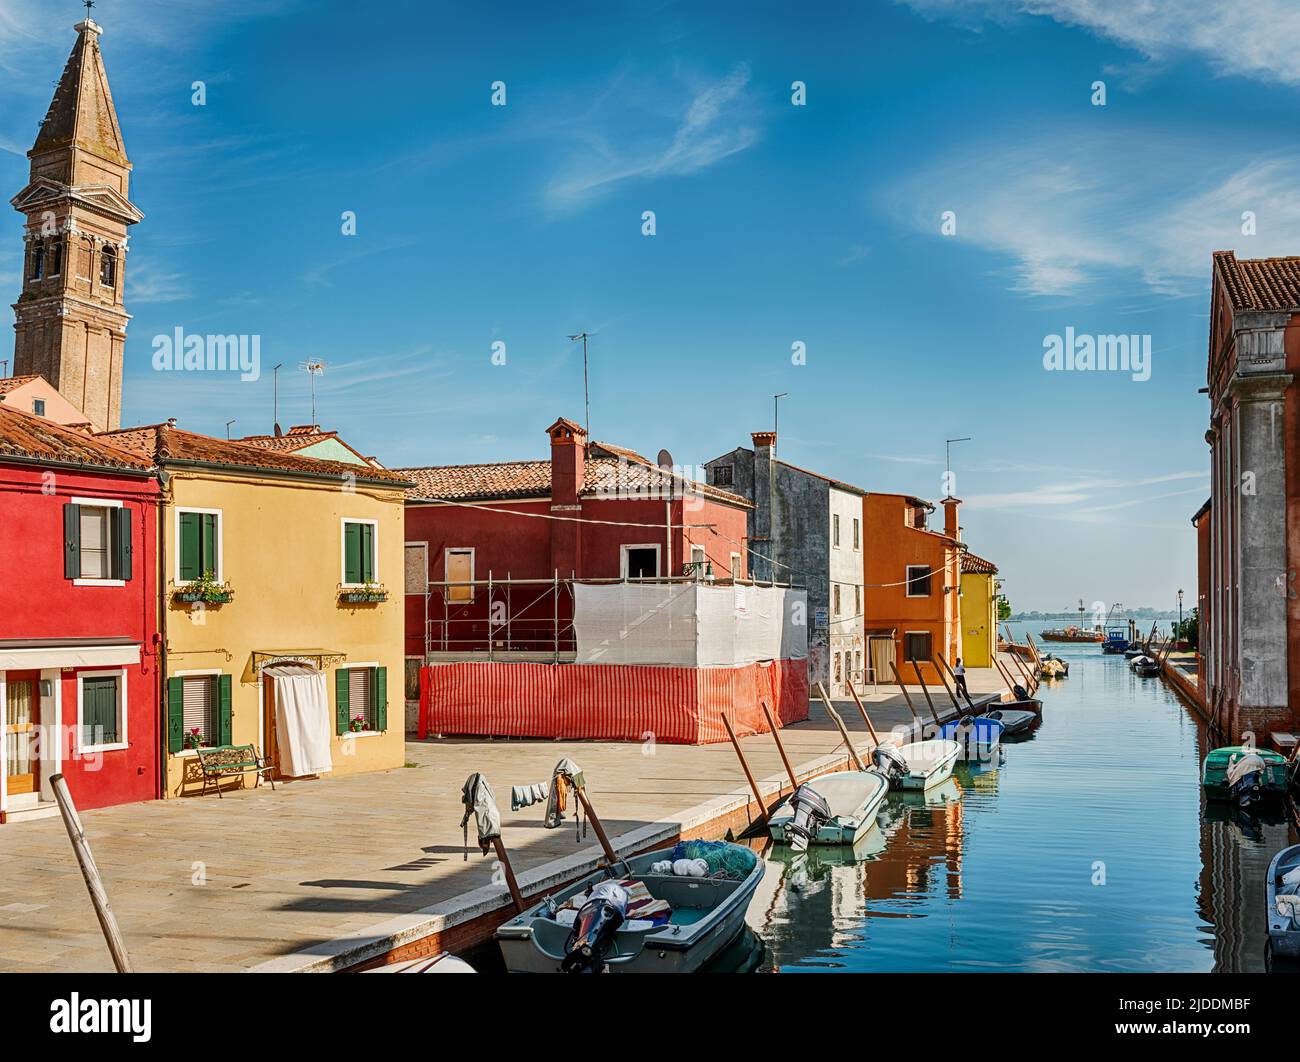 Sunlight illuminates one side of a canal in the town of Burano in the Venice harbor. Stock Photo